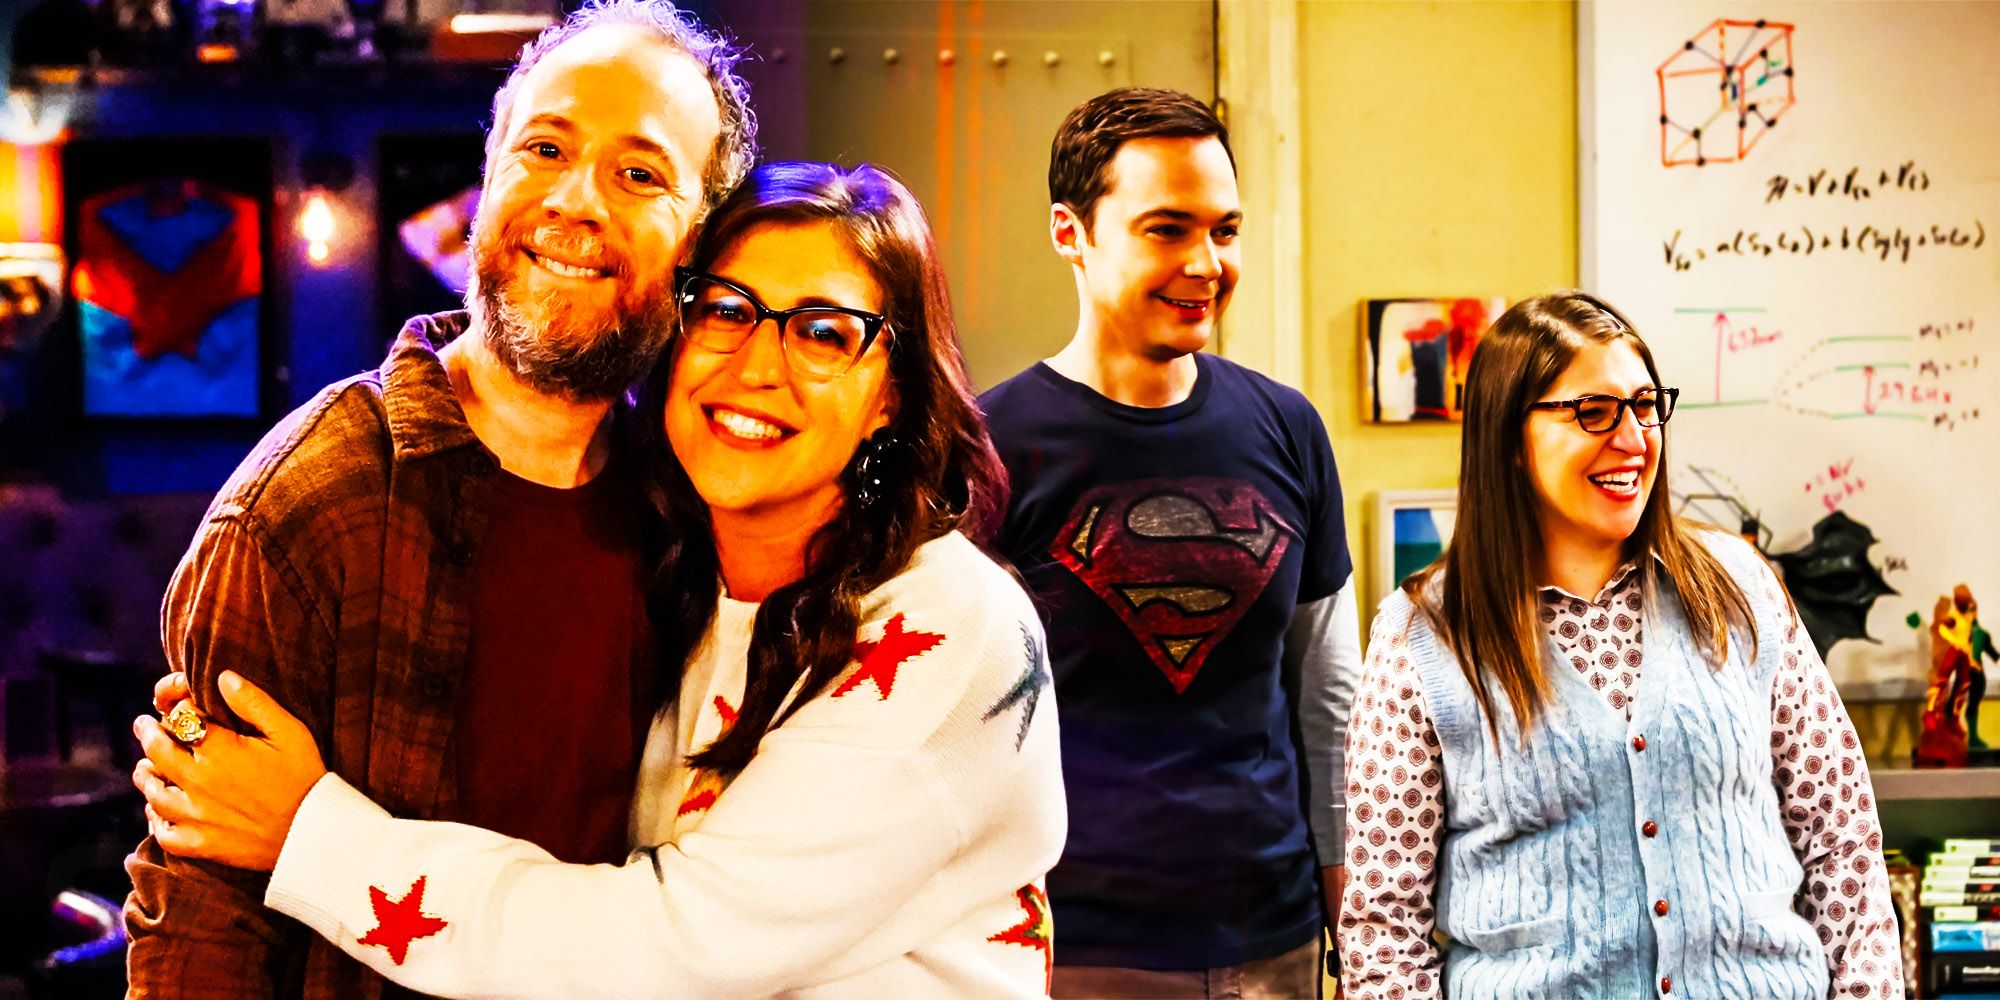 Bialik's New Big Bang Theory Reunion Is What Amy & Sheldon Could've Been